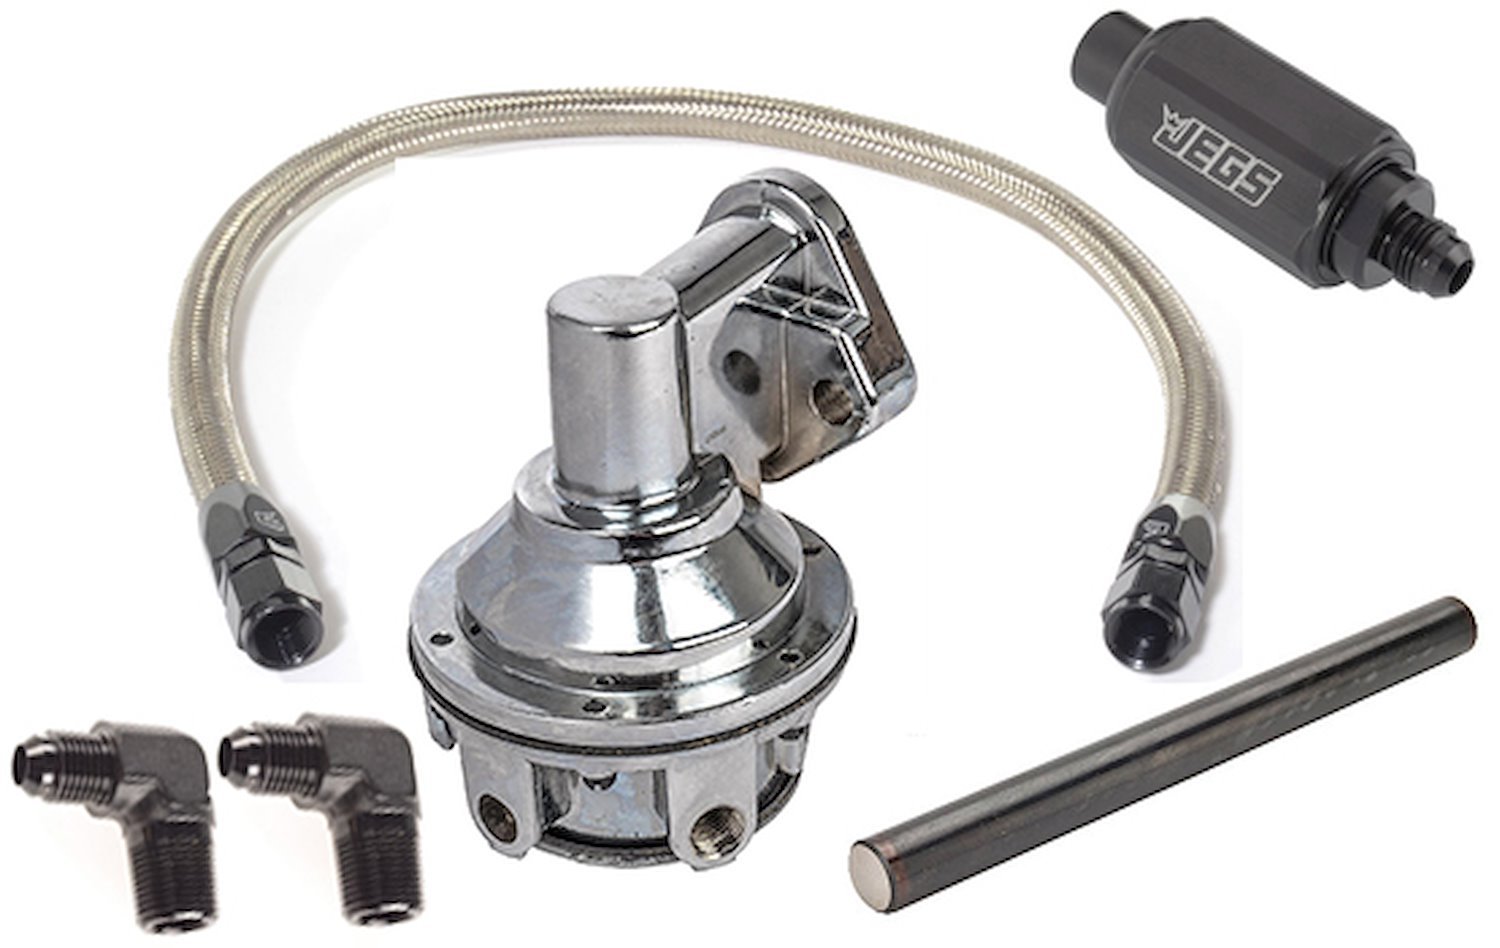 Mechanical Fuel Pump & Installation Kit for Small Block Chevy 265-283-327-350-400 [110 gph, Black Fittings]